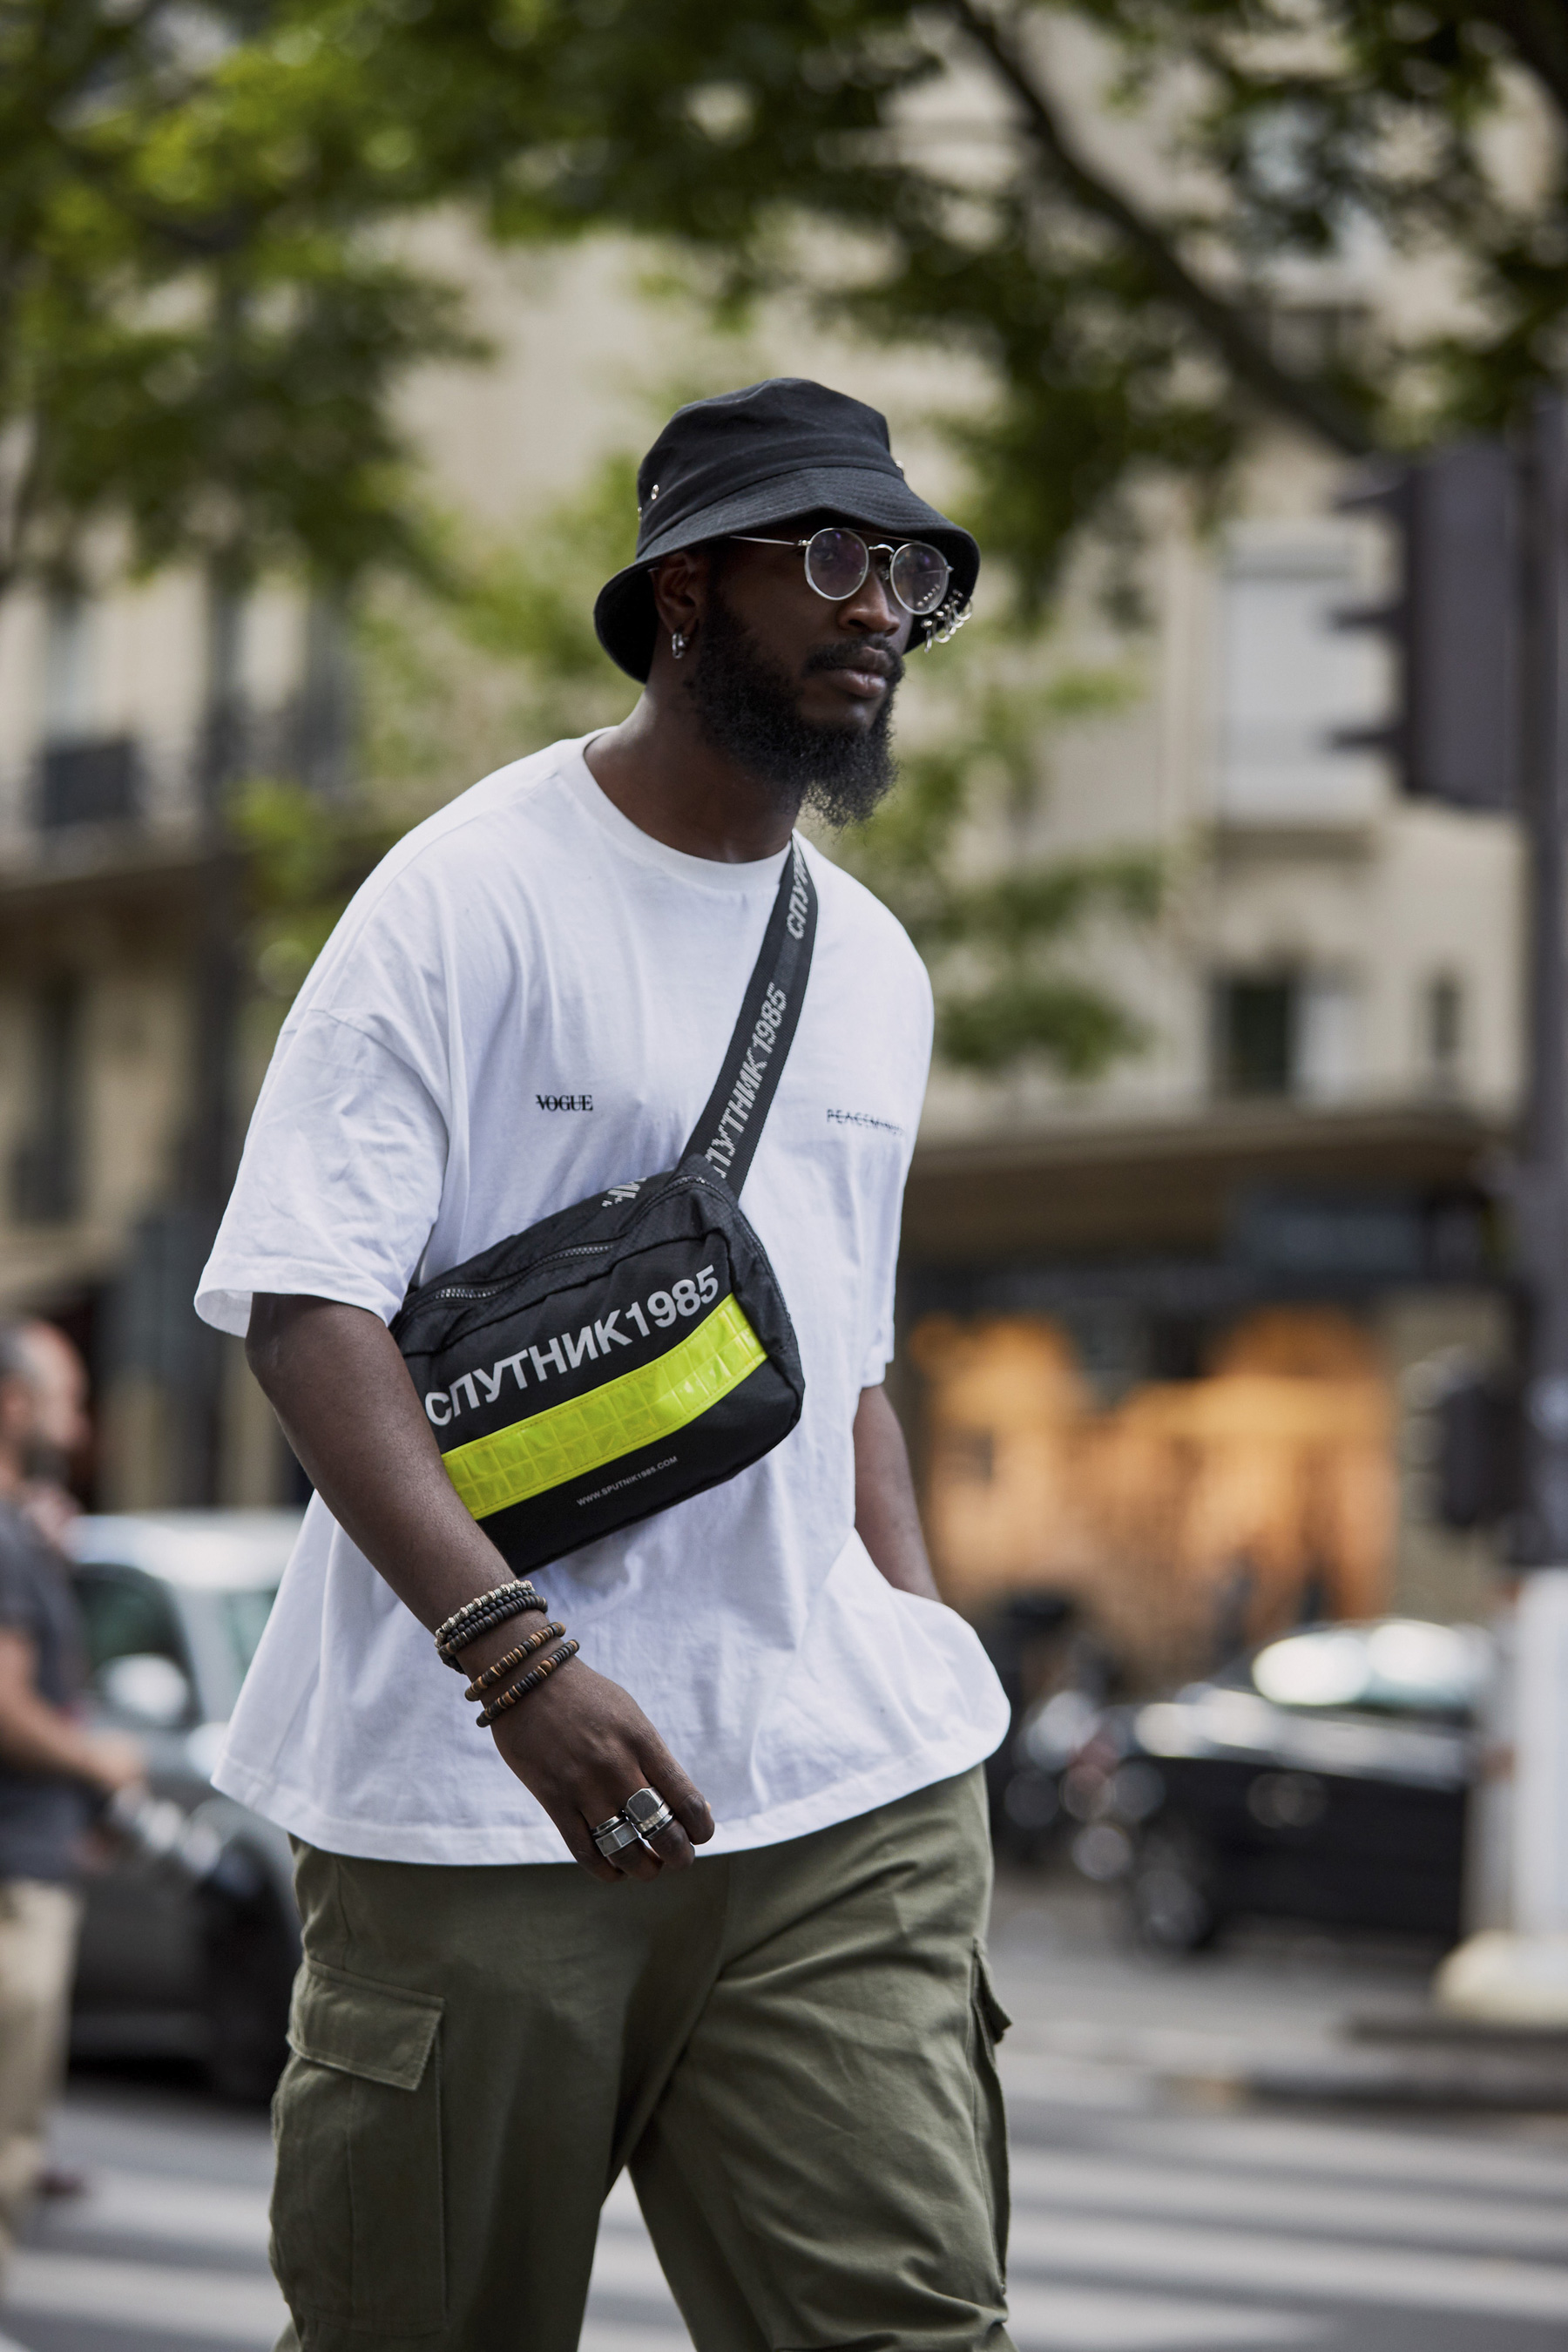 Paris Men's Street Style Spring 2020 More from DAY 4 | The Impression